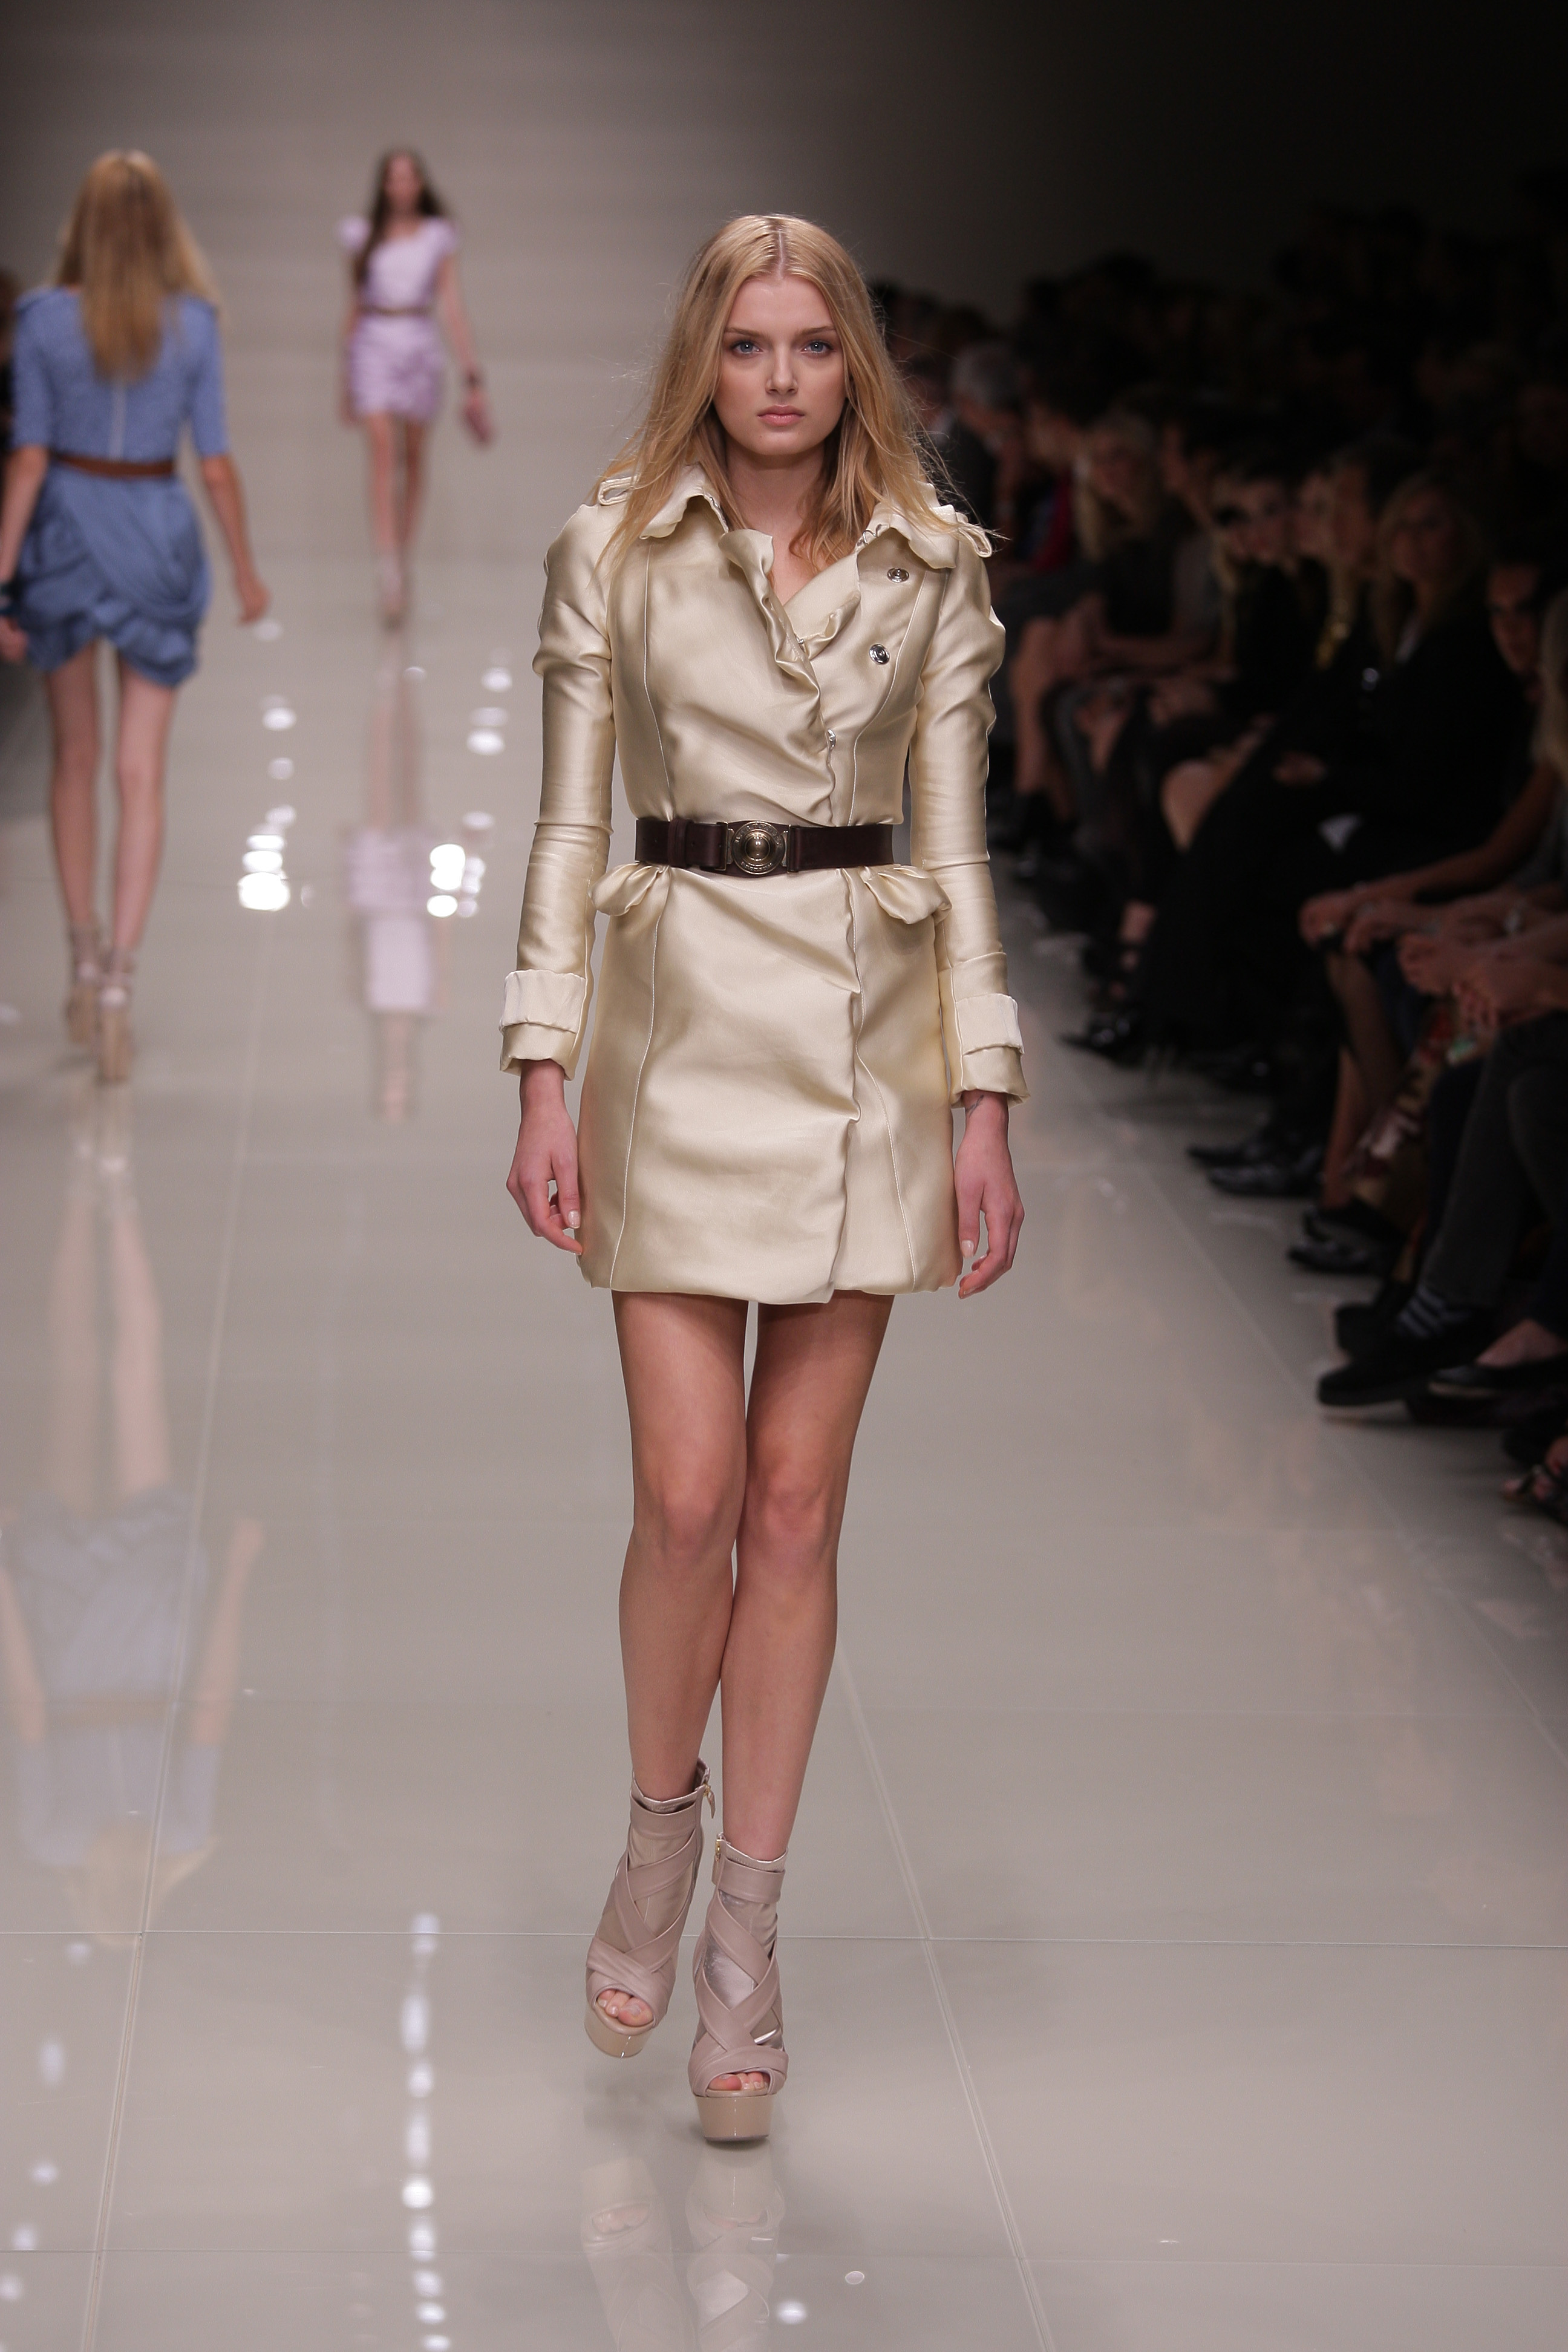 London Fashion Week Spring 2010: Burberry shimmers, Amanda Wakeley melts and Basso & Brooke come of age